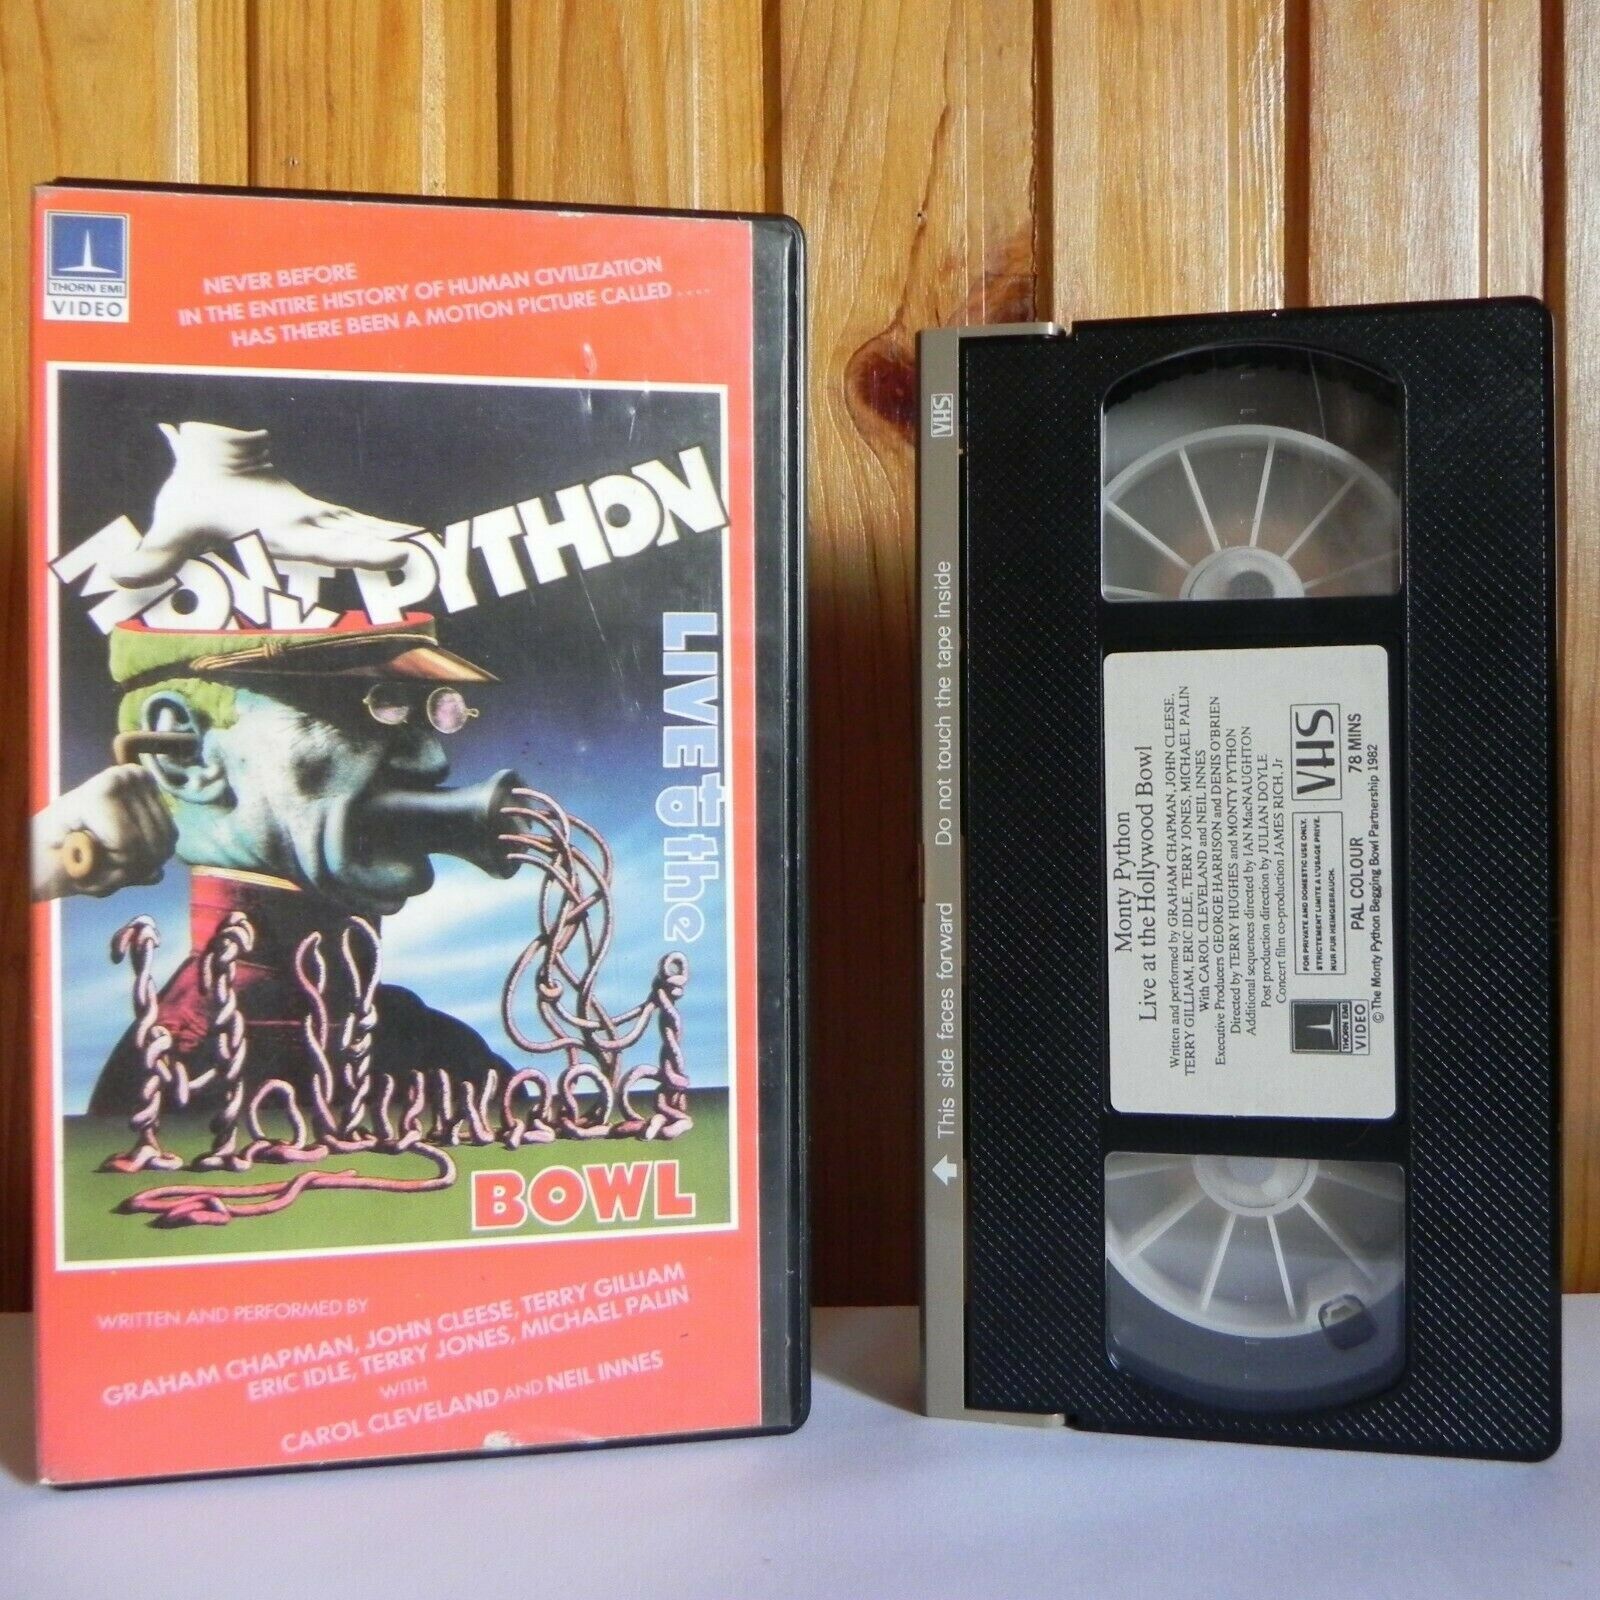 Monty Python: Live At The Hollywood Bowl - John Cleese - Terry Gilliam - VHS-